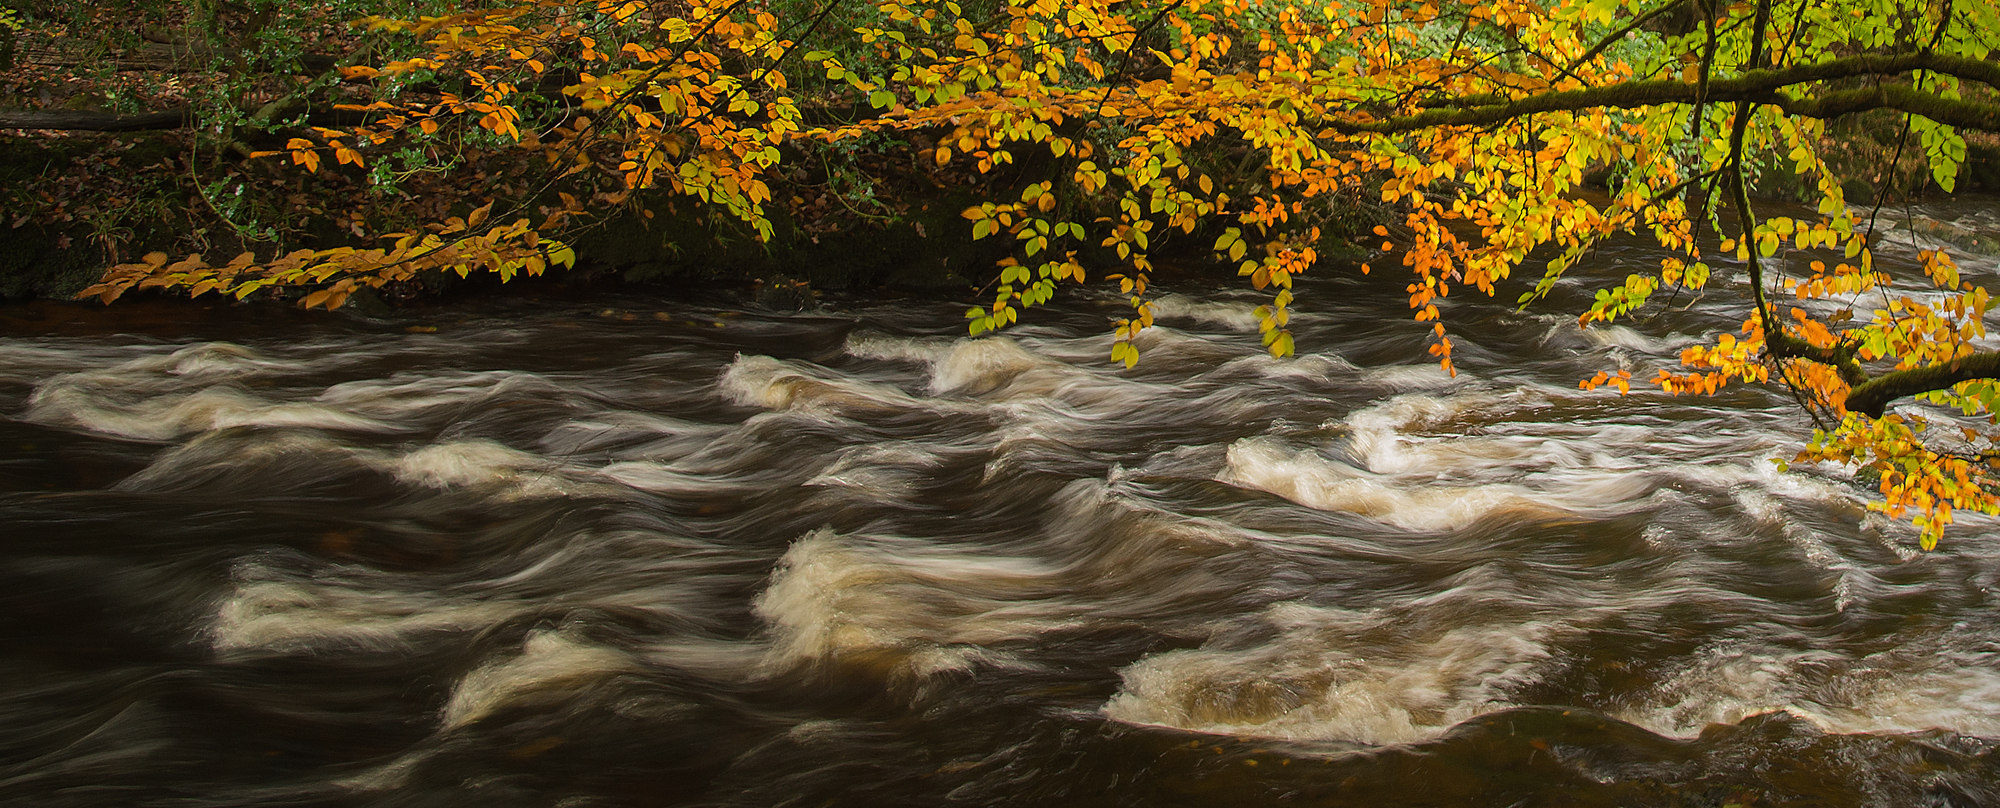 3rd Place Autumn Flow By Roger Creber